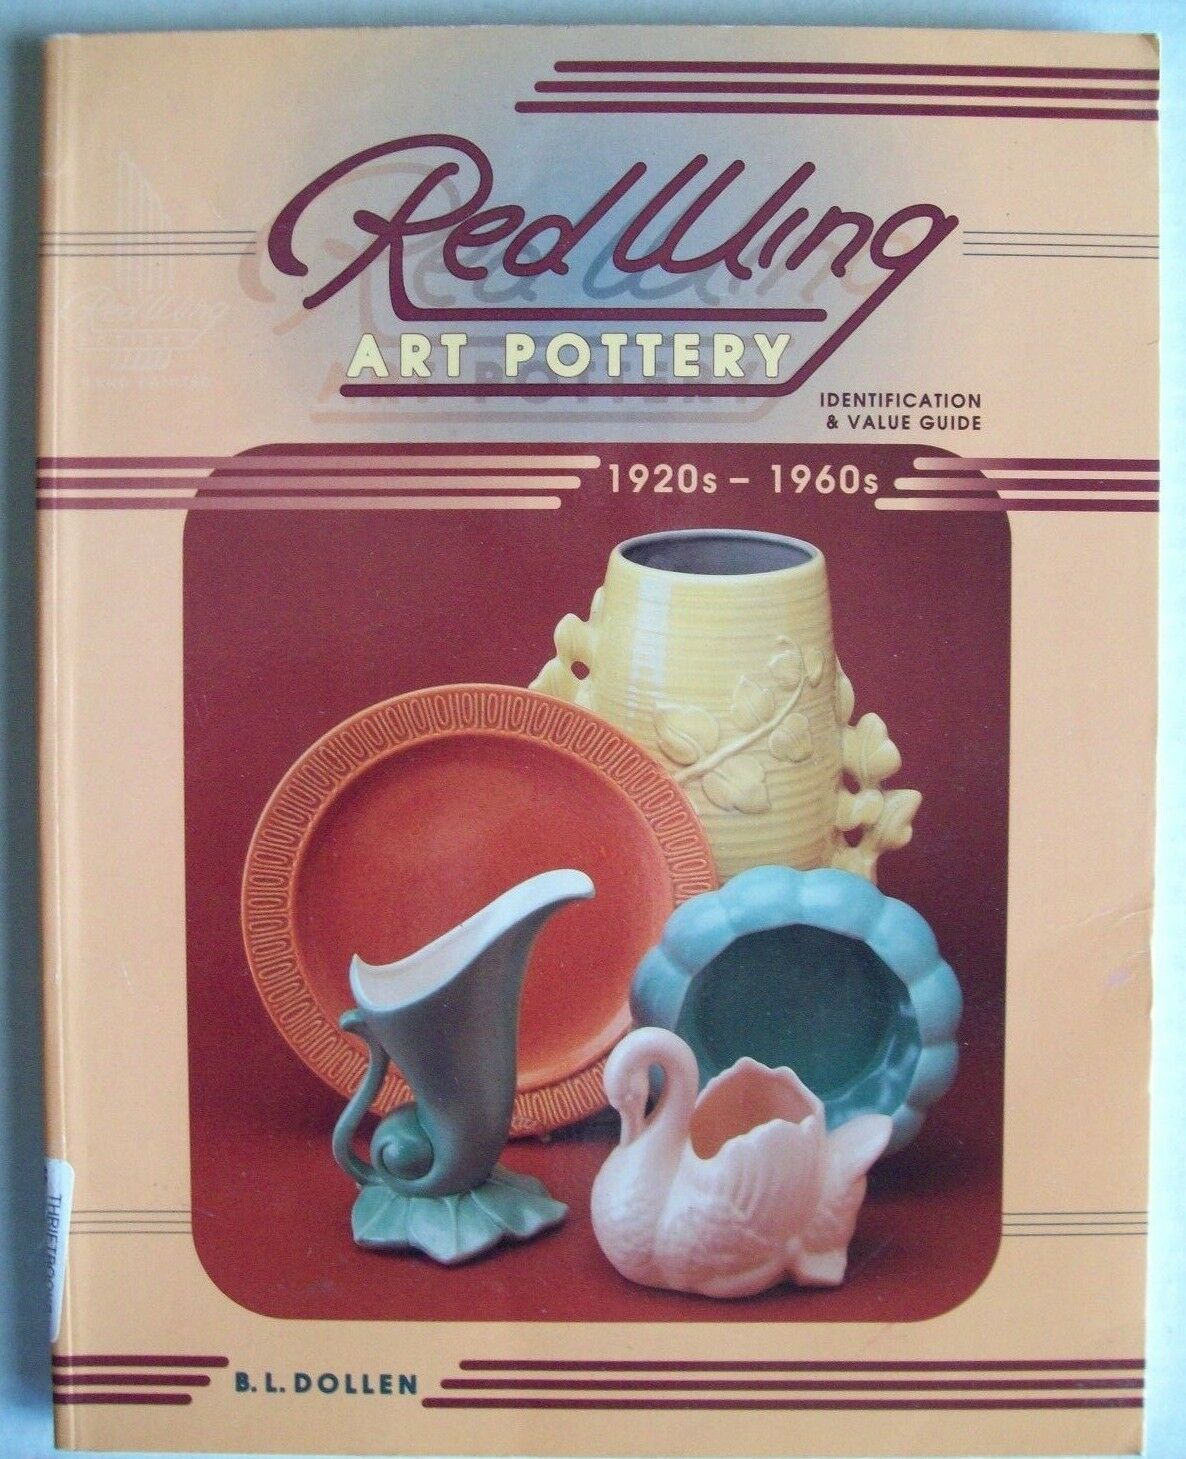 Red Wing Stoneware Price Guide Collectors Book Crocks Jugs Vases Compotes Bowls